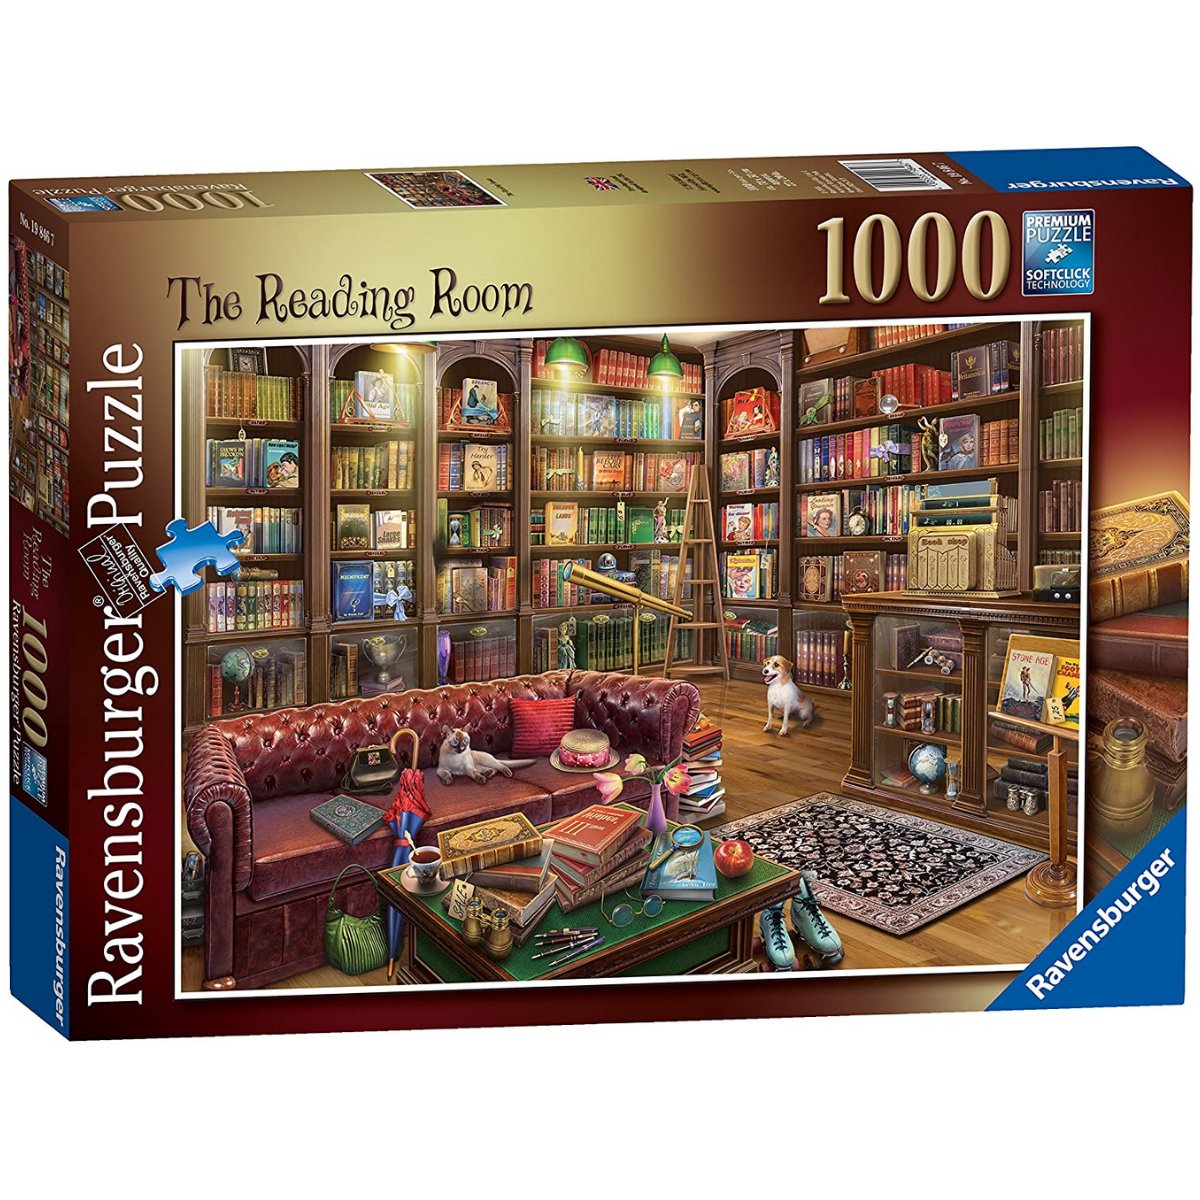 Ravensburger The Reading Room Jigsaw Puzzle (1000 Pieces) - Phillips Hobbies